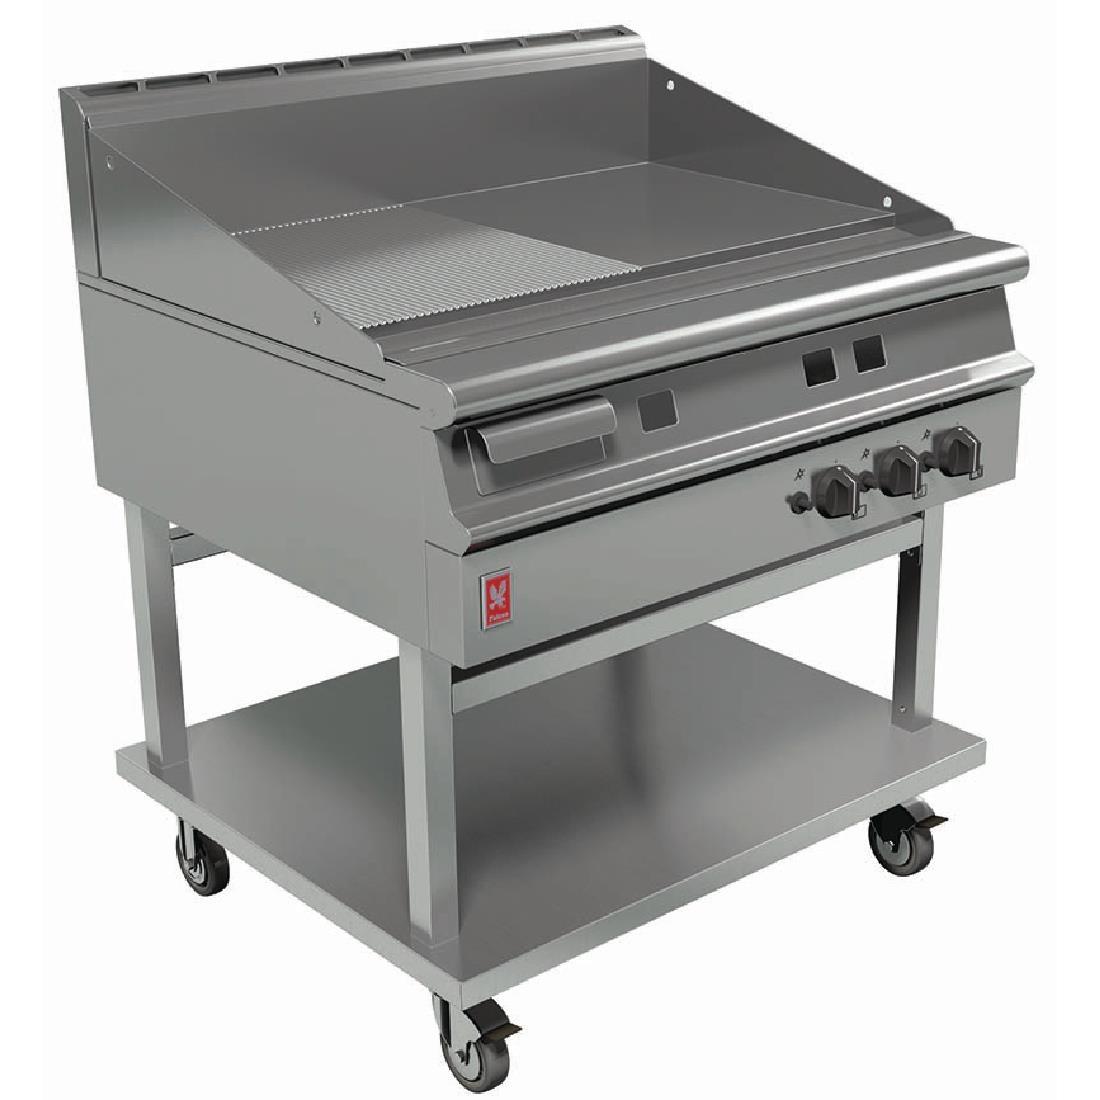 Falcon Dominator Plus 900mm Wide Half Ribbed Natural Gas Griddle on Mobile Stand G3941R - GP052-N  - 1